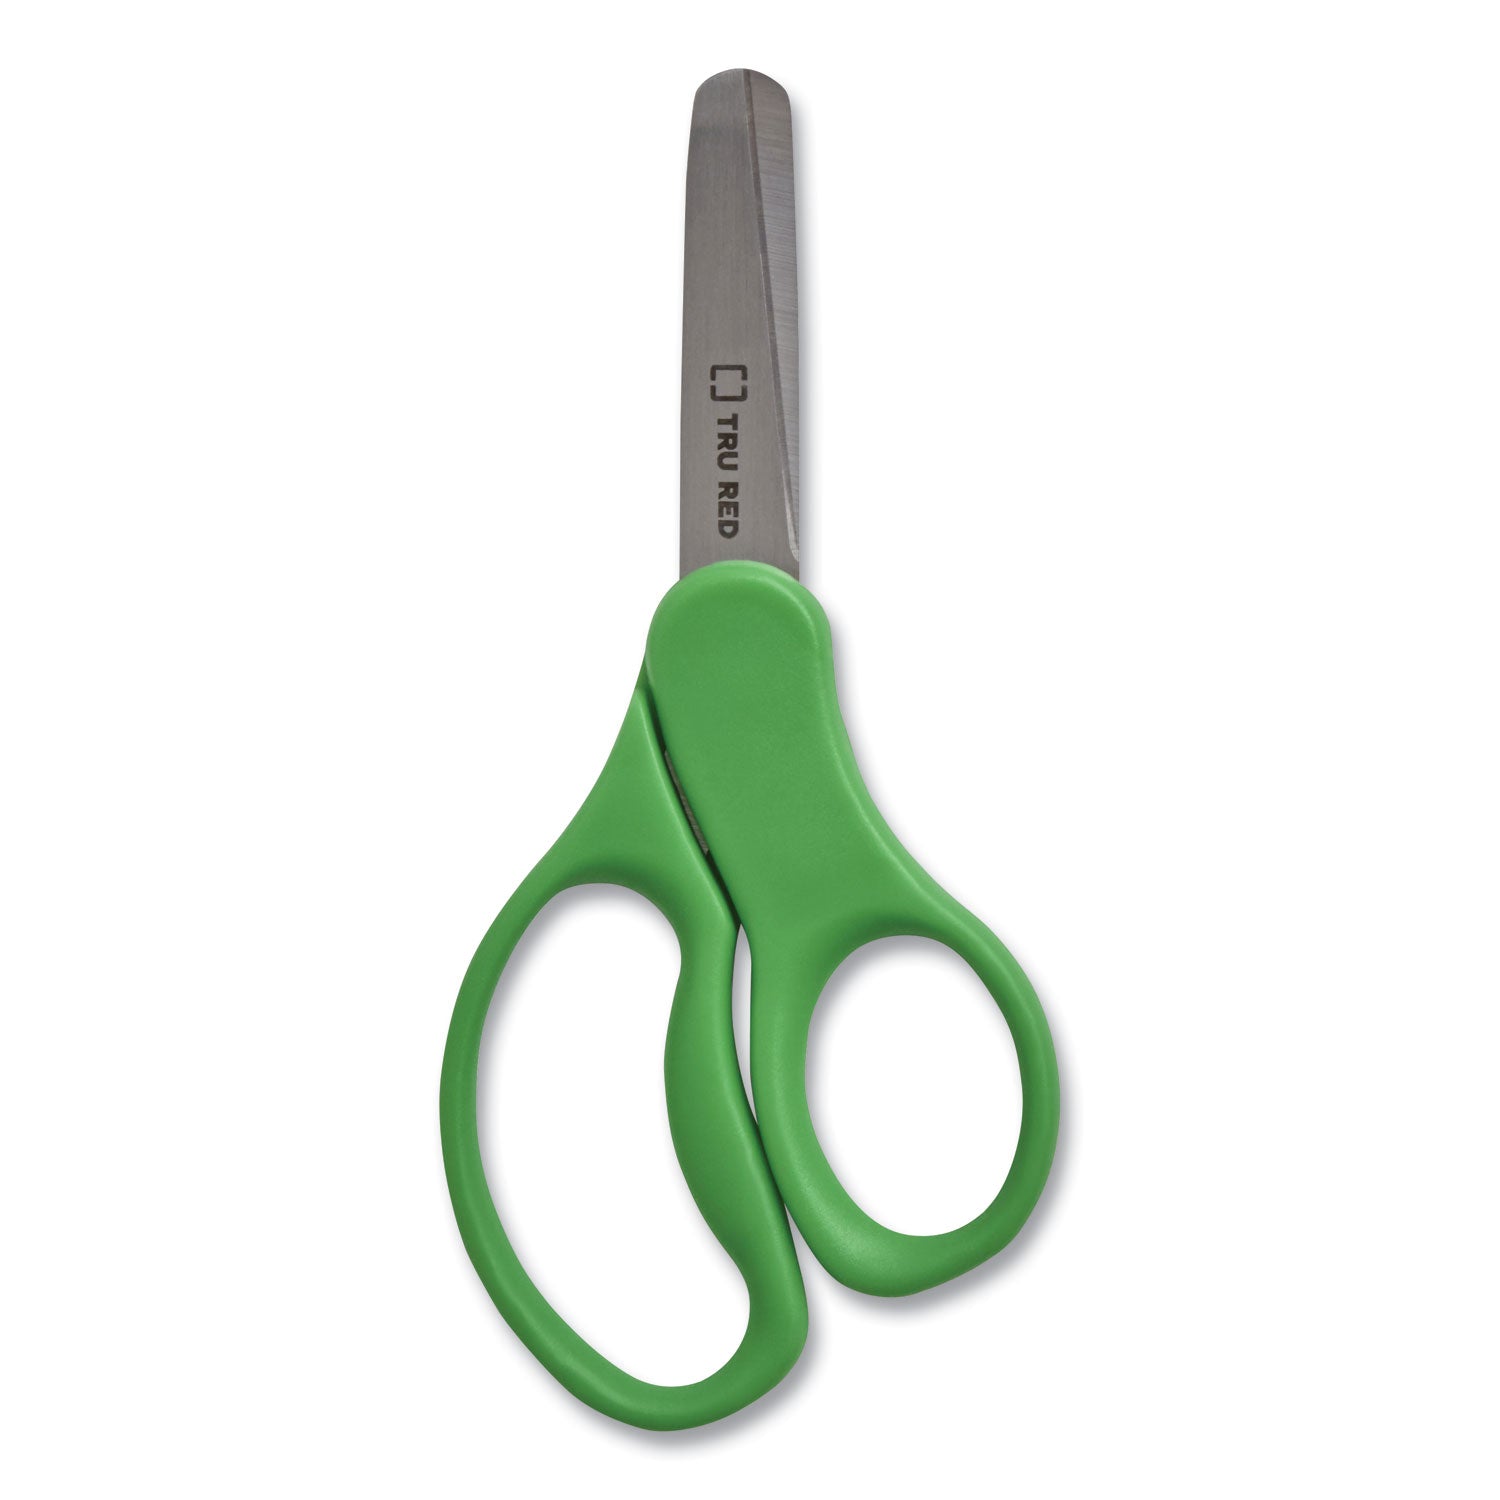 kids-blunt-tip-stainless-steel-safety-scissors-5-long-205-cut-length-assorted-straight-handles-12-pack_tud24380519 - 2